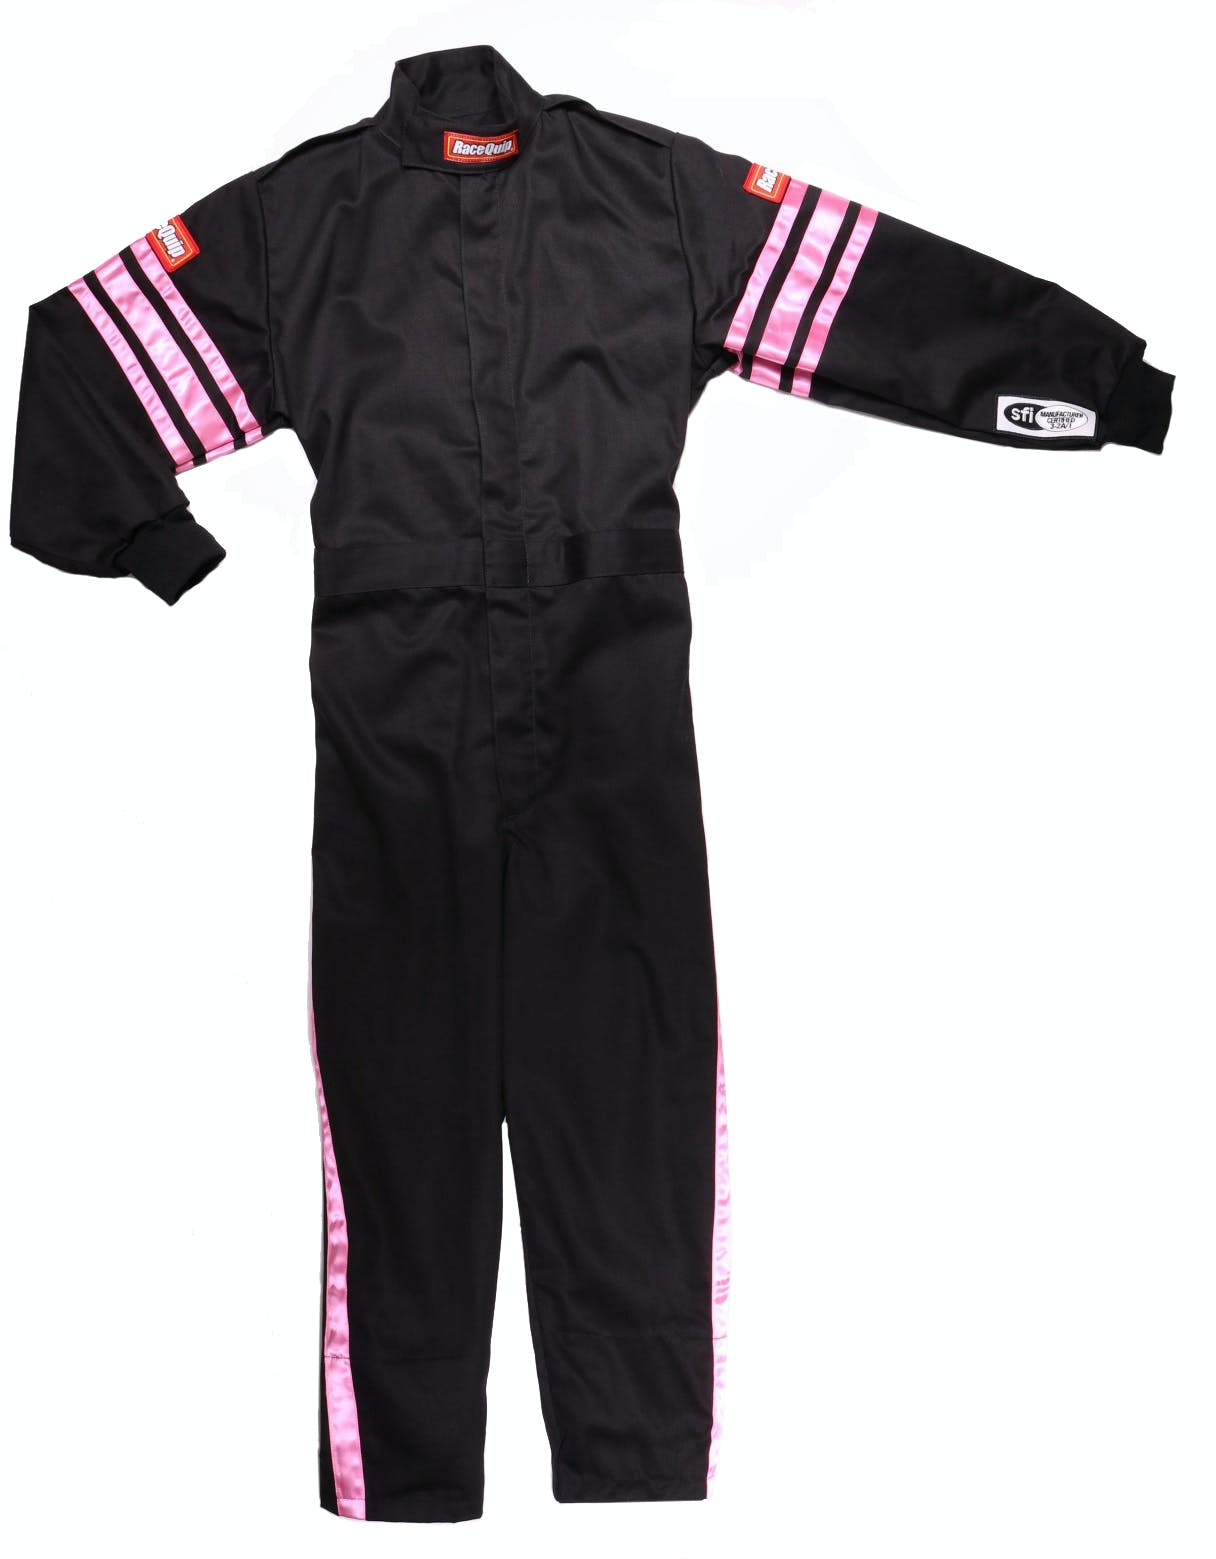 RaceQuip 1950897 SFI-1 Pyrovatex One-Piece Single-Layer Youth Racing Fire Suit (Black/Pink-XXL)